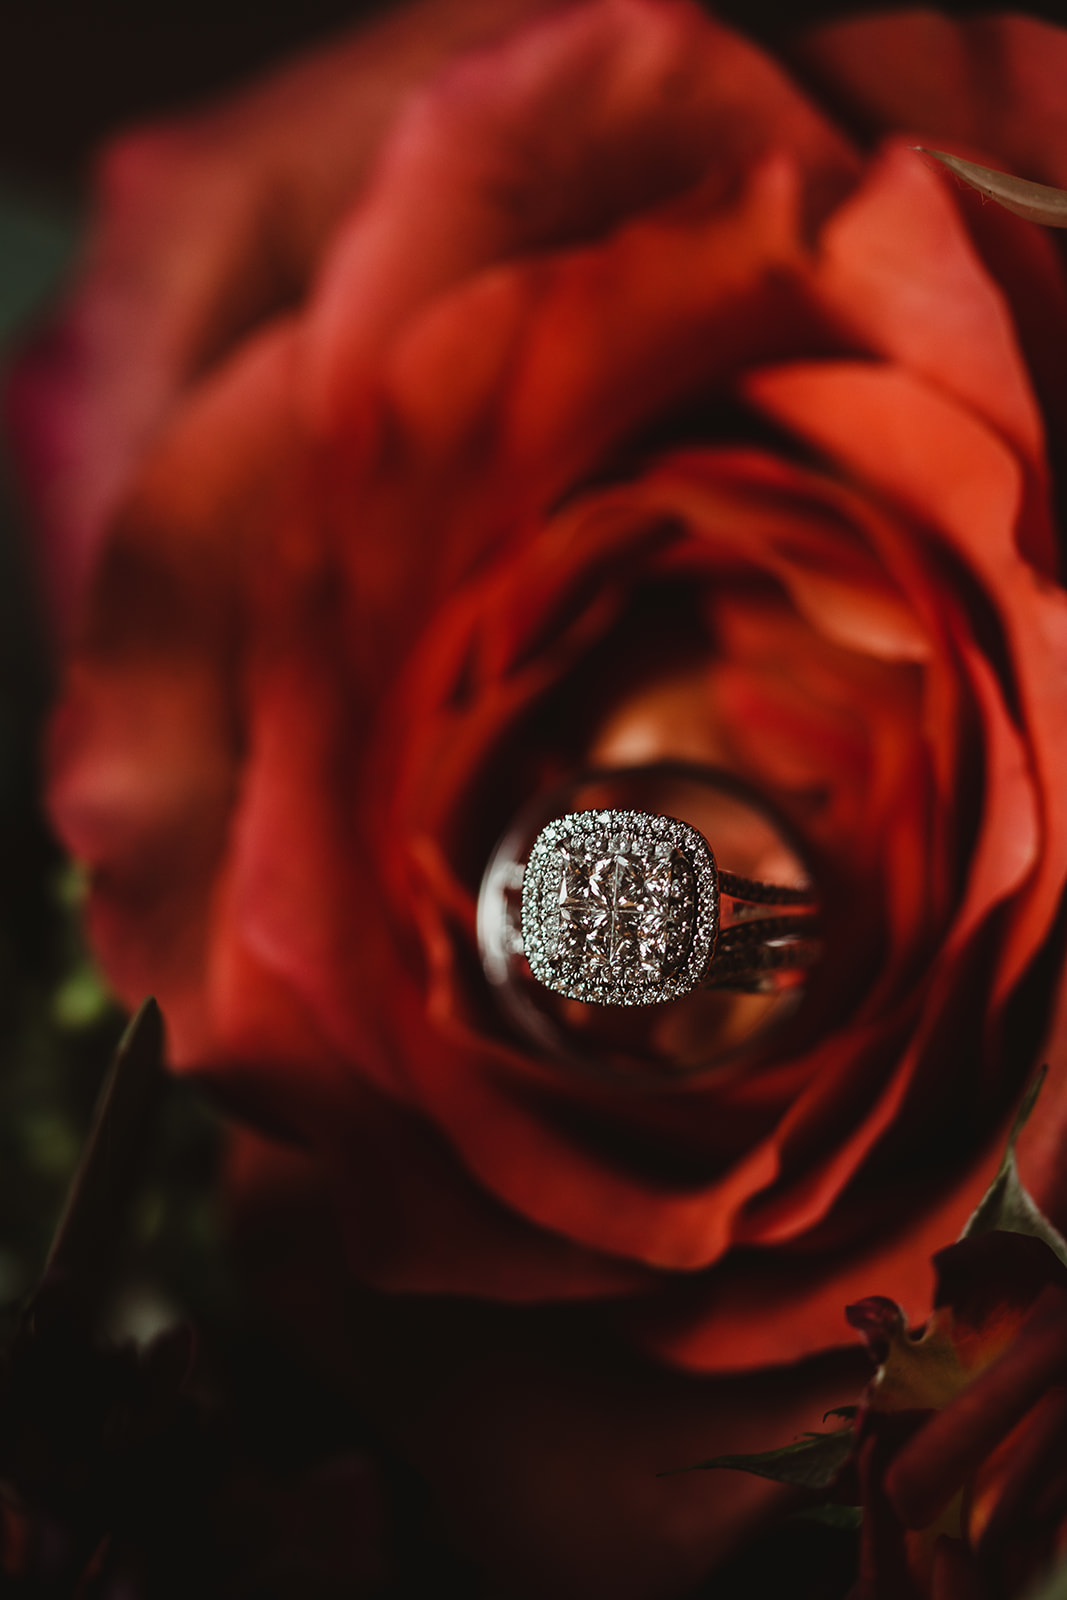 A sparkling cushion shaped wedding ring is photographed in red roses. Ring shot Close up photography Chippewa Valley Wedding #dixonappleorchard #orchardweddingvenue #outdoorwedding #appleorchardwedding #wisconsonweddingvenue